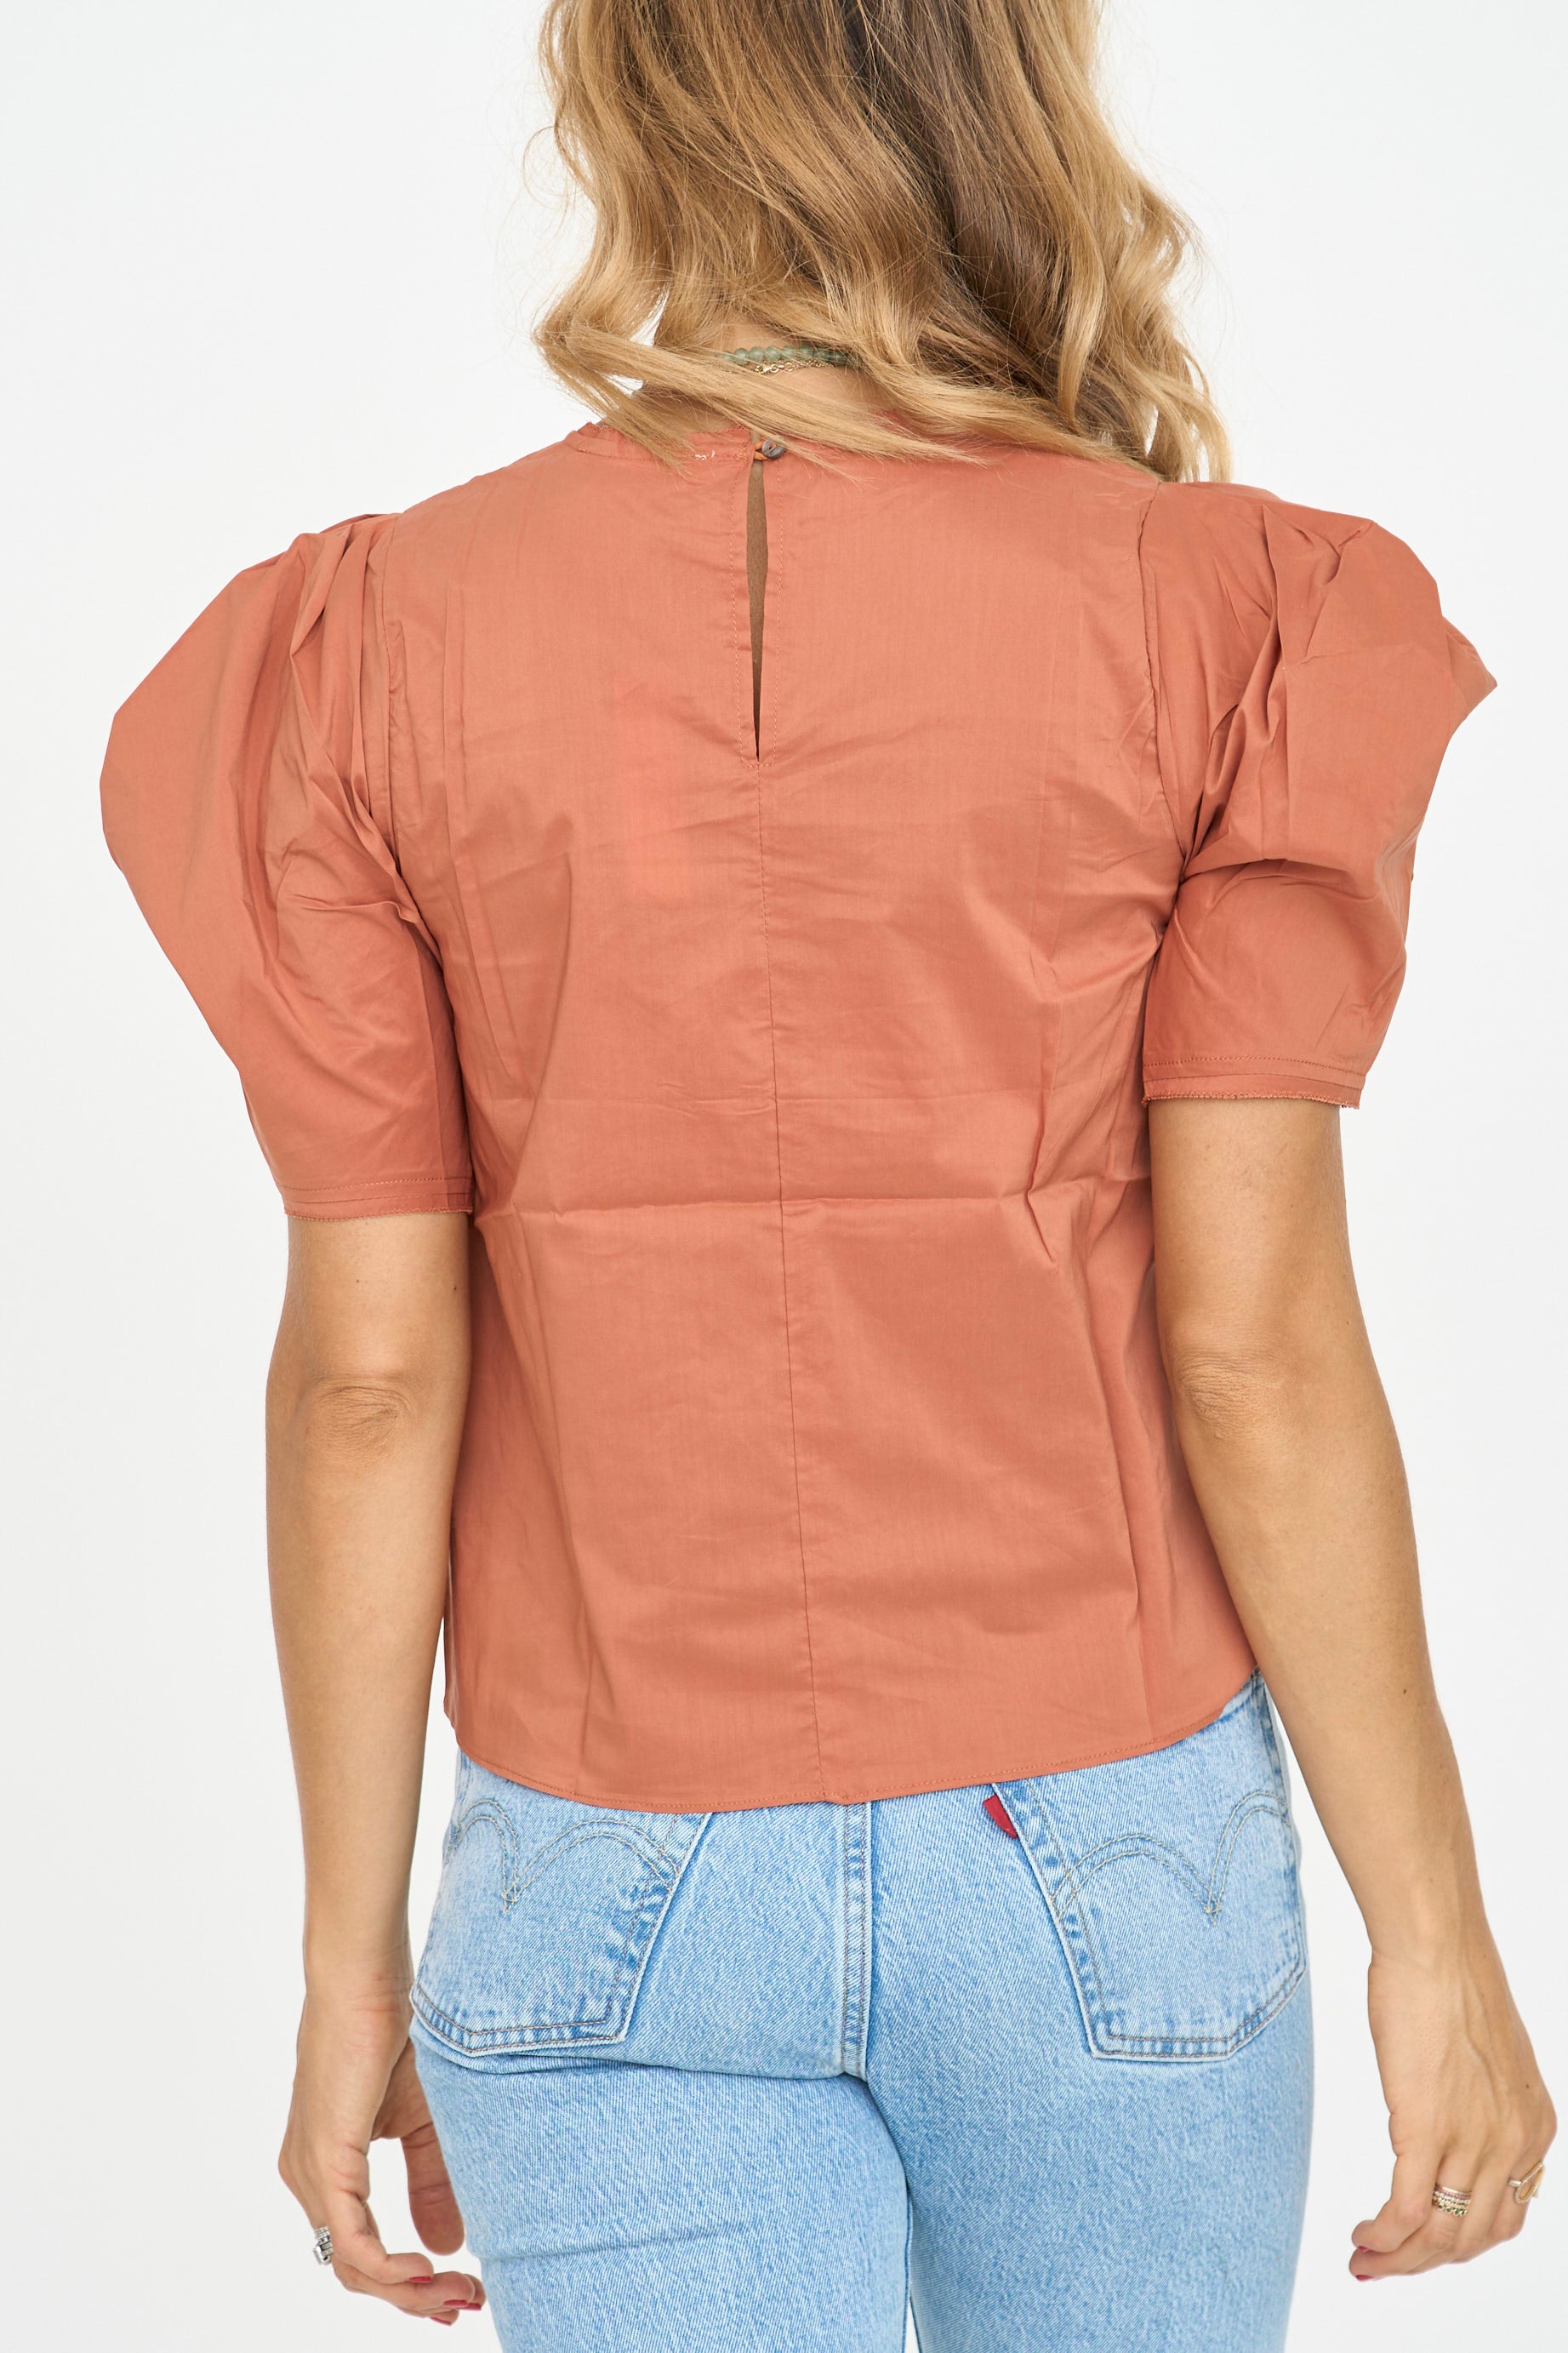 Townes Puff Sleeve Top